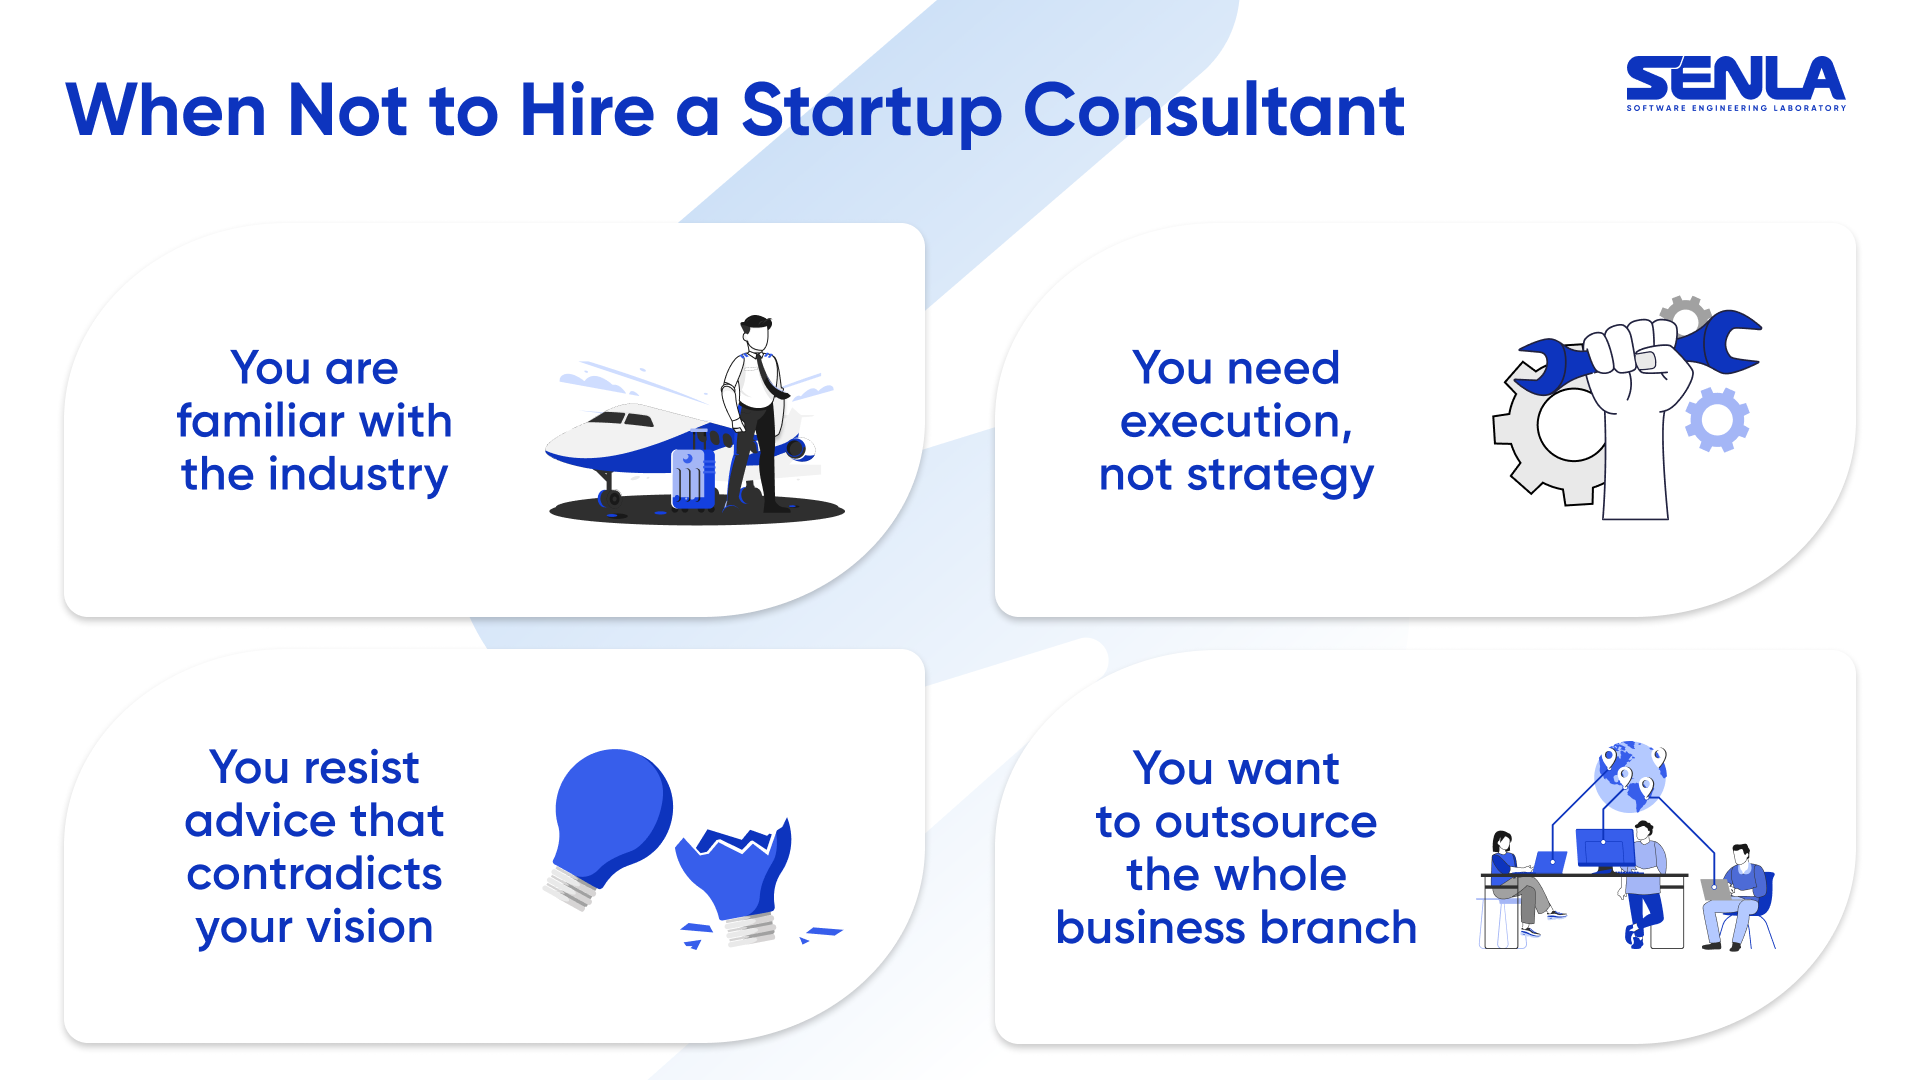 When not to hire a startup consultant